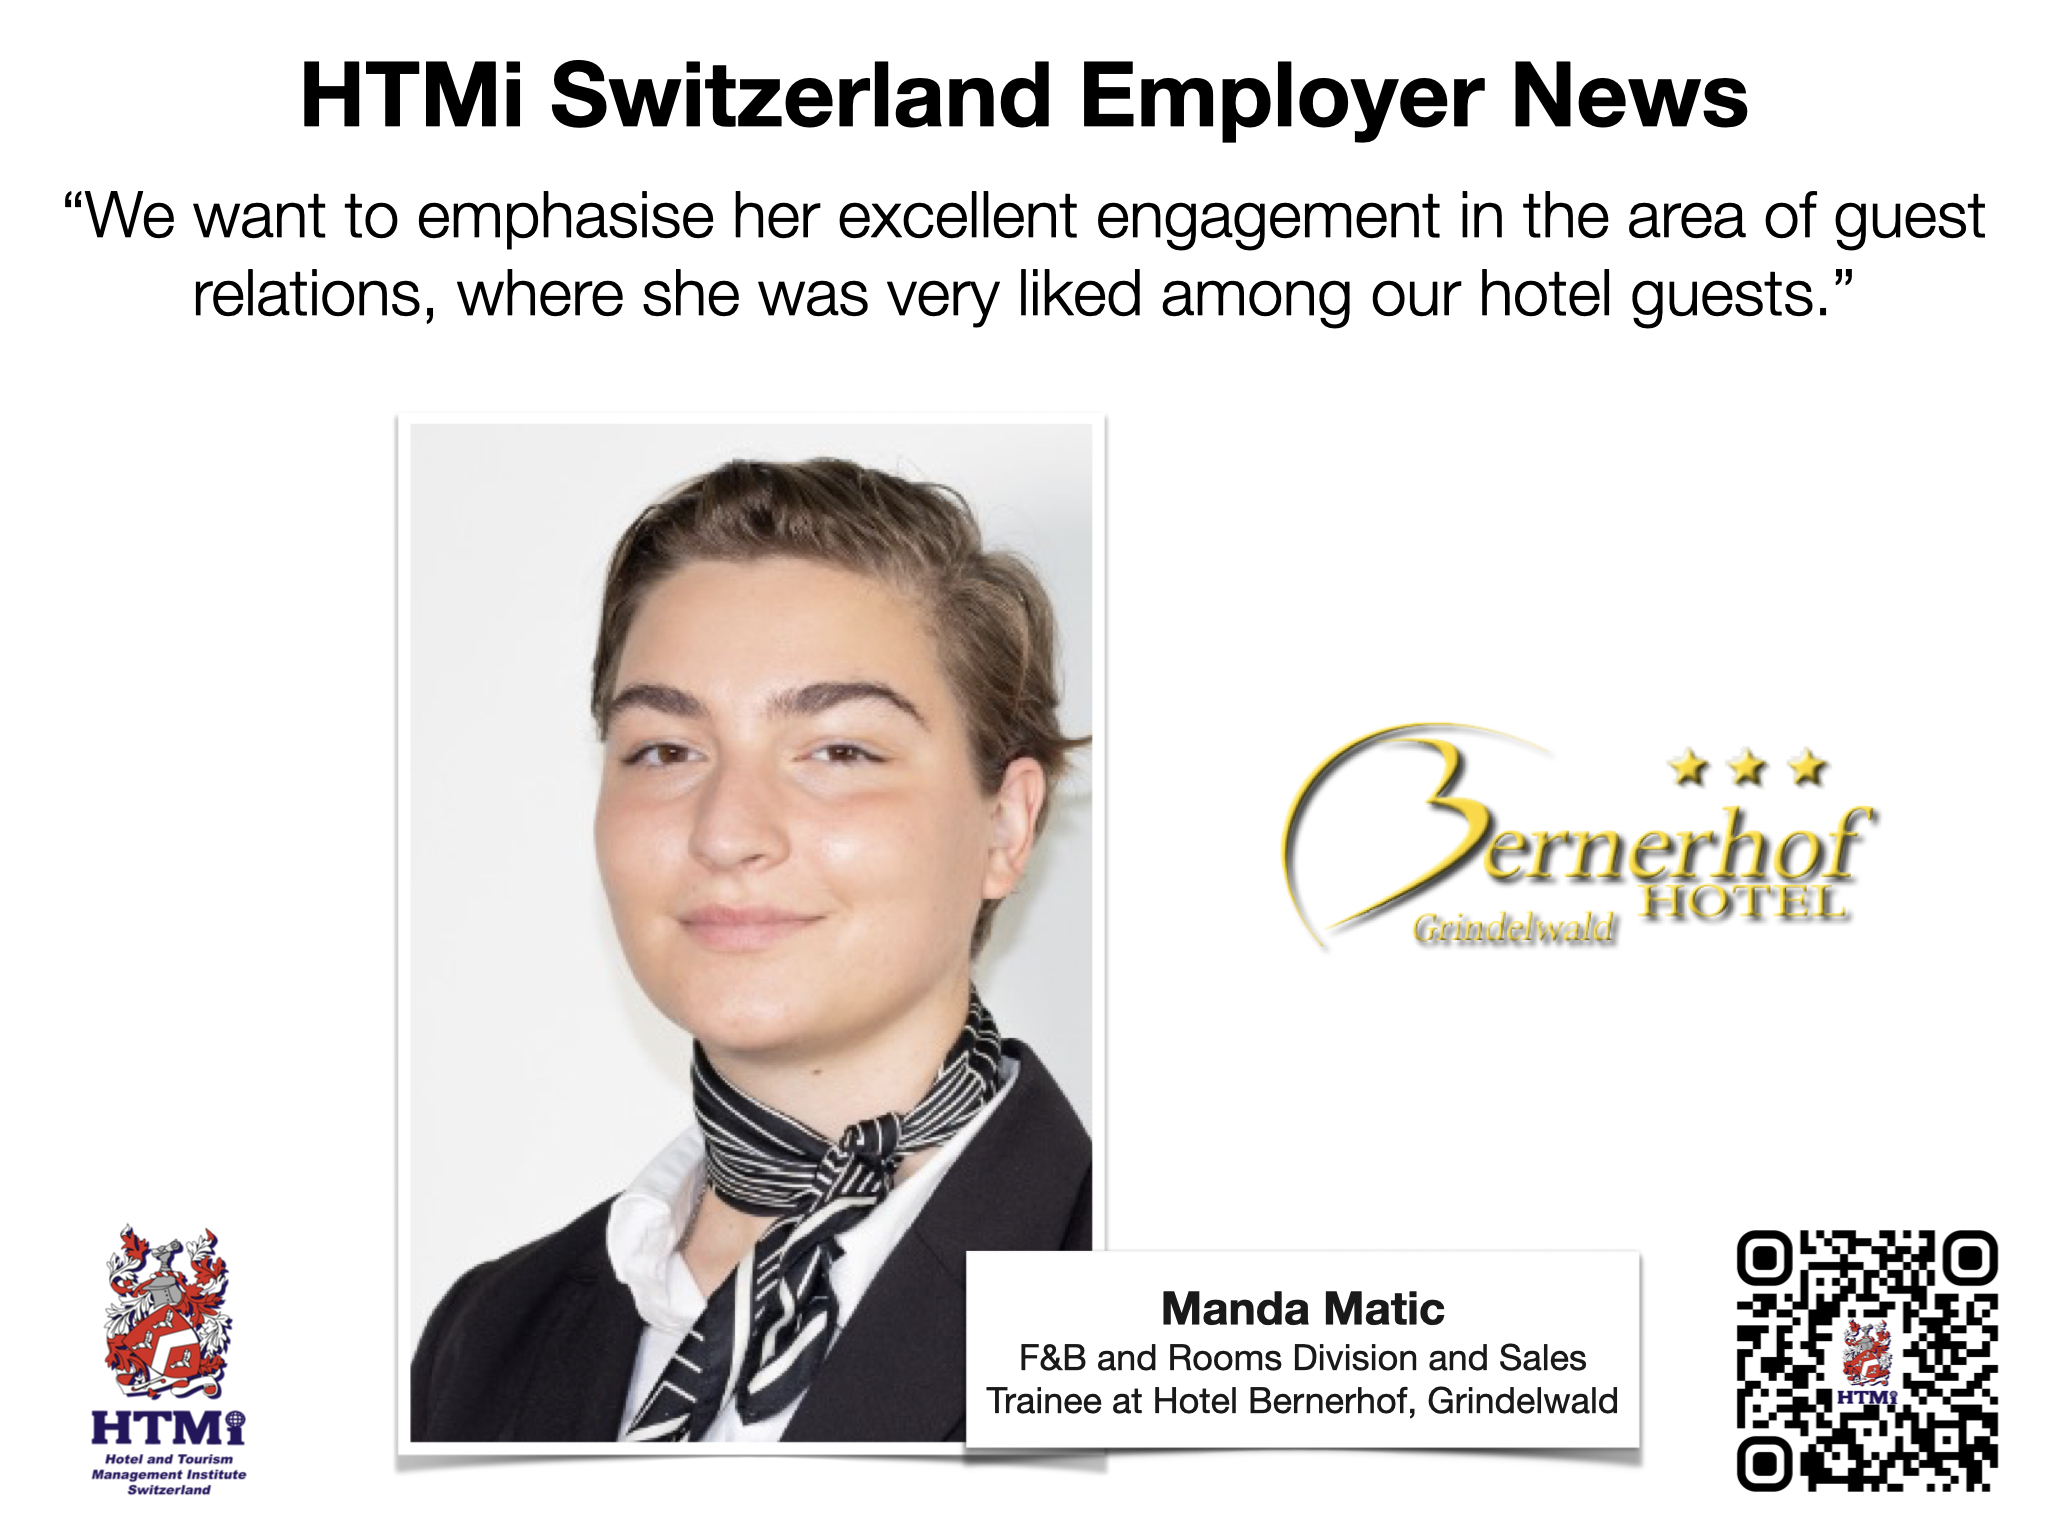 Manda Matic - F&B and Rooms Division and Sales Trainee at Hotel Bernerhof, Grindelwald - HTMi Switzerland Employer News